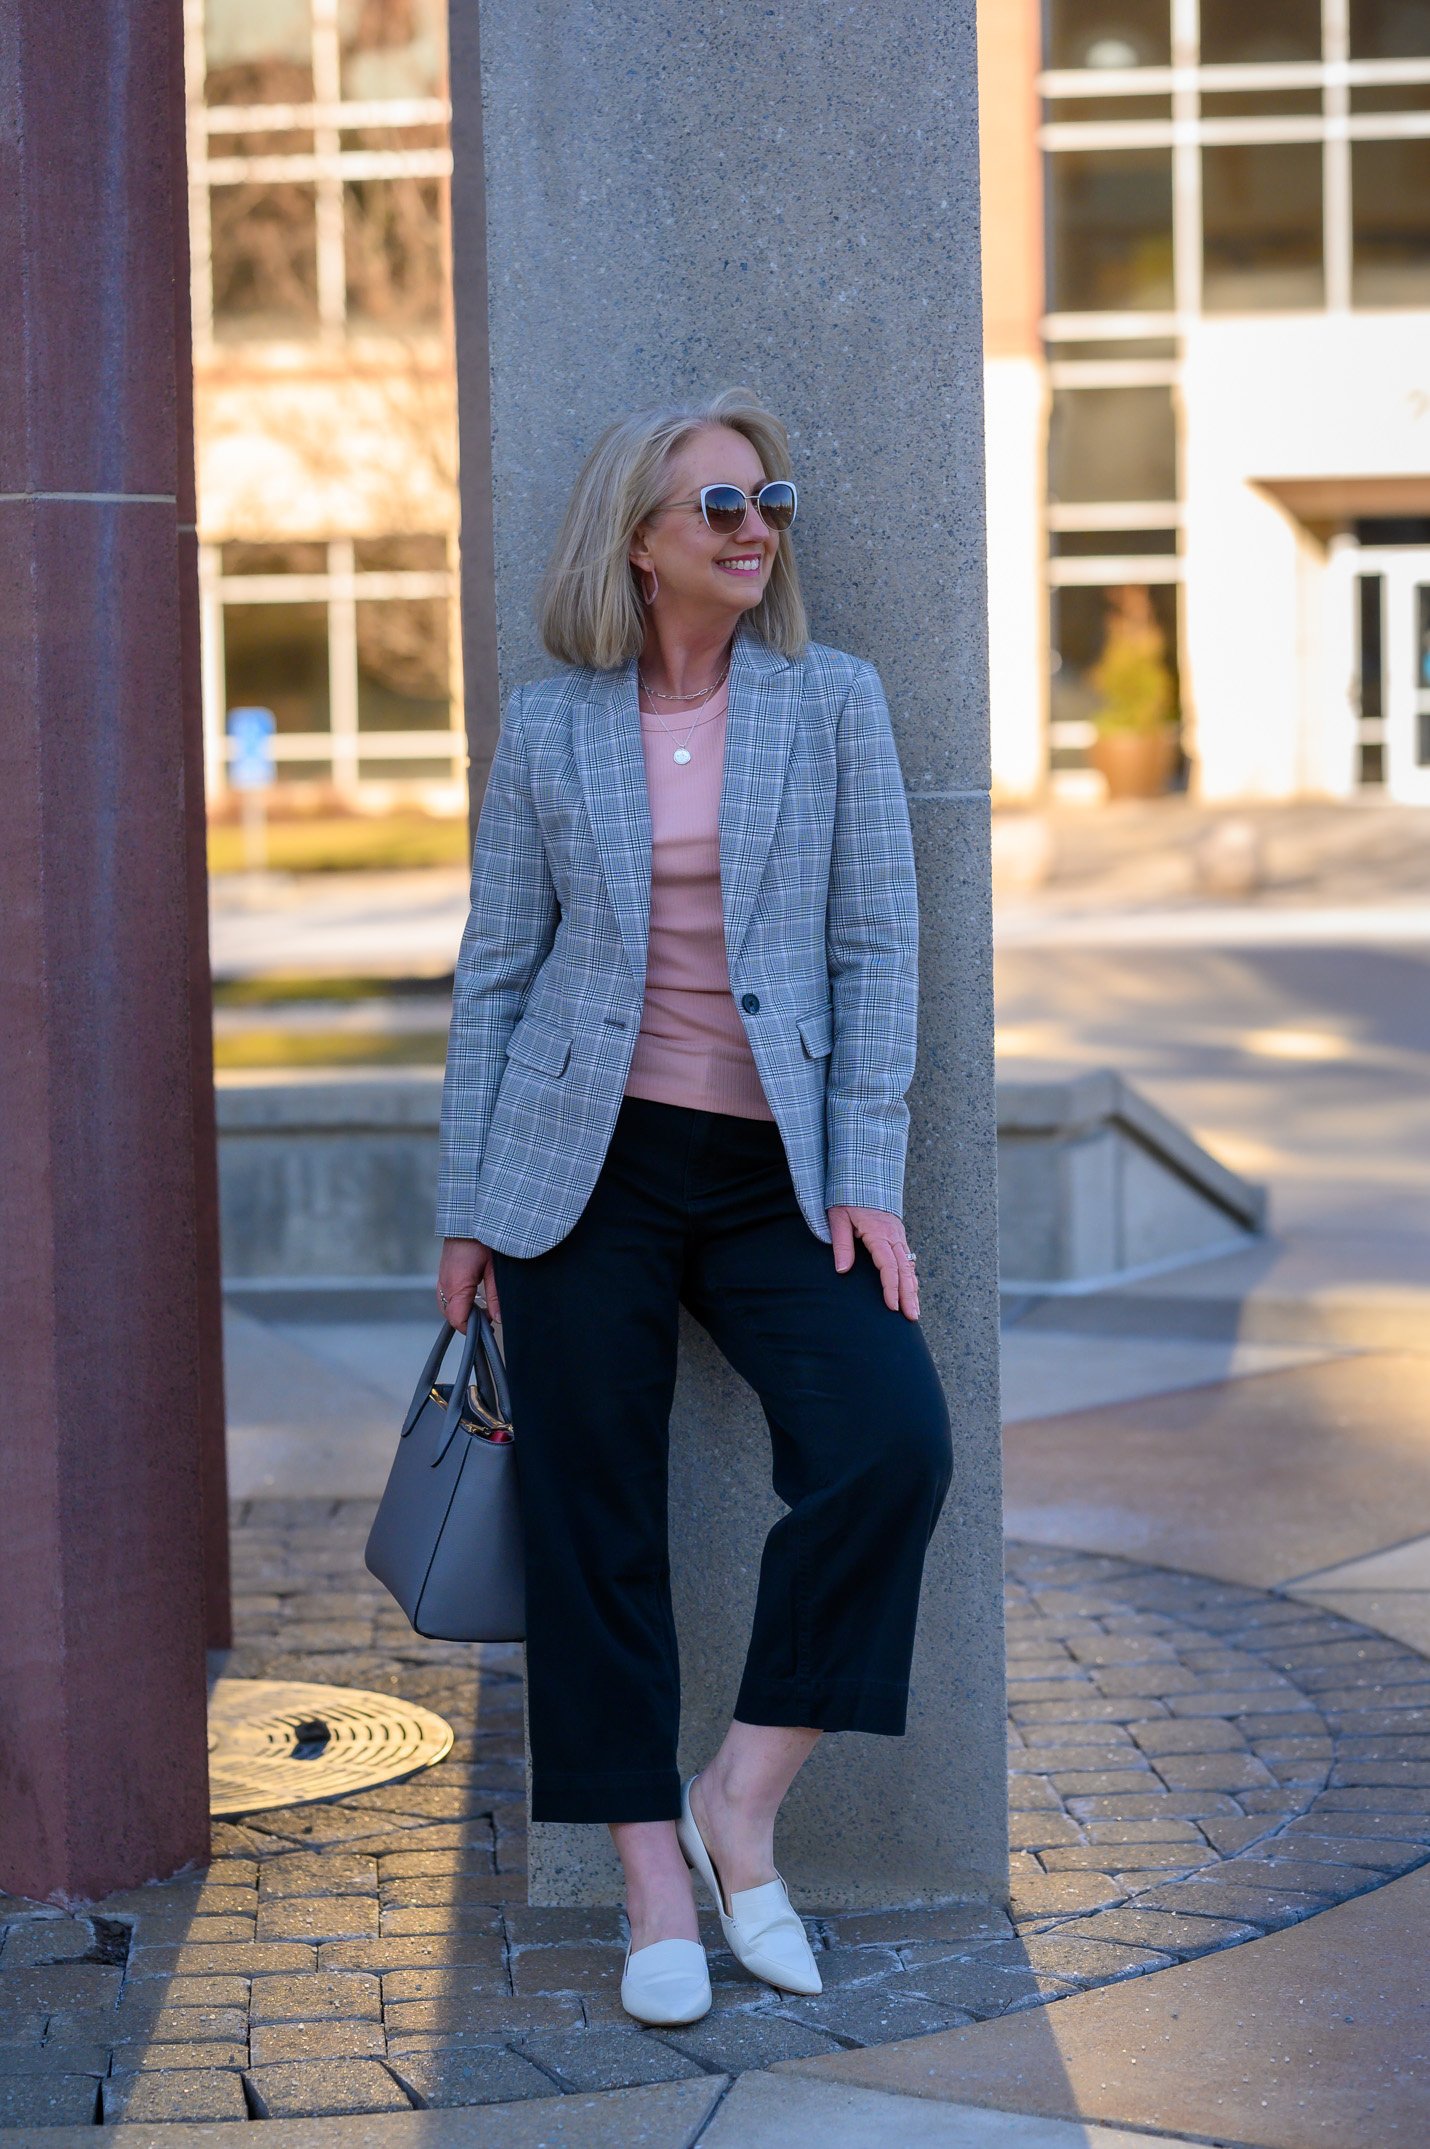 Plaid Blazer and Black Crop Pants for the Office